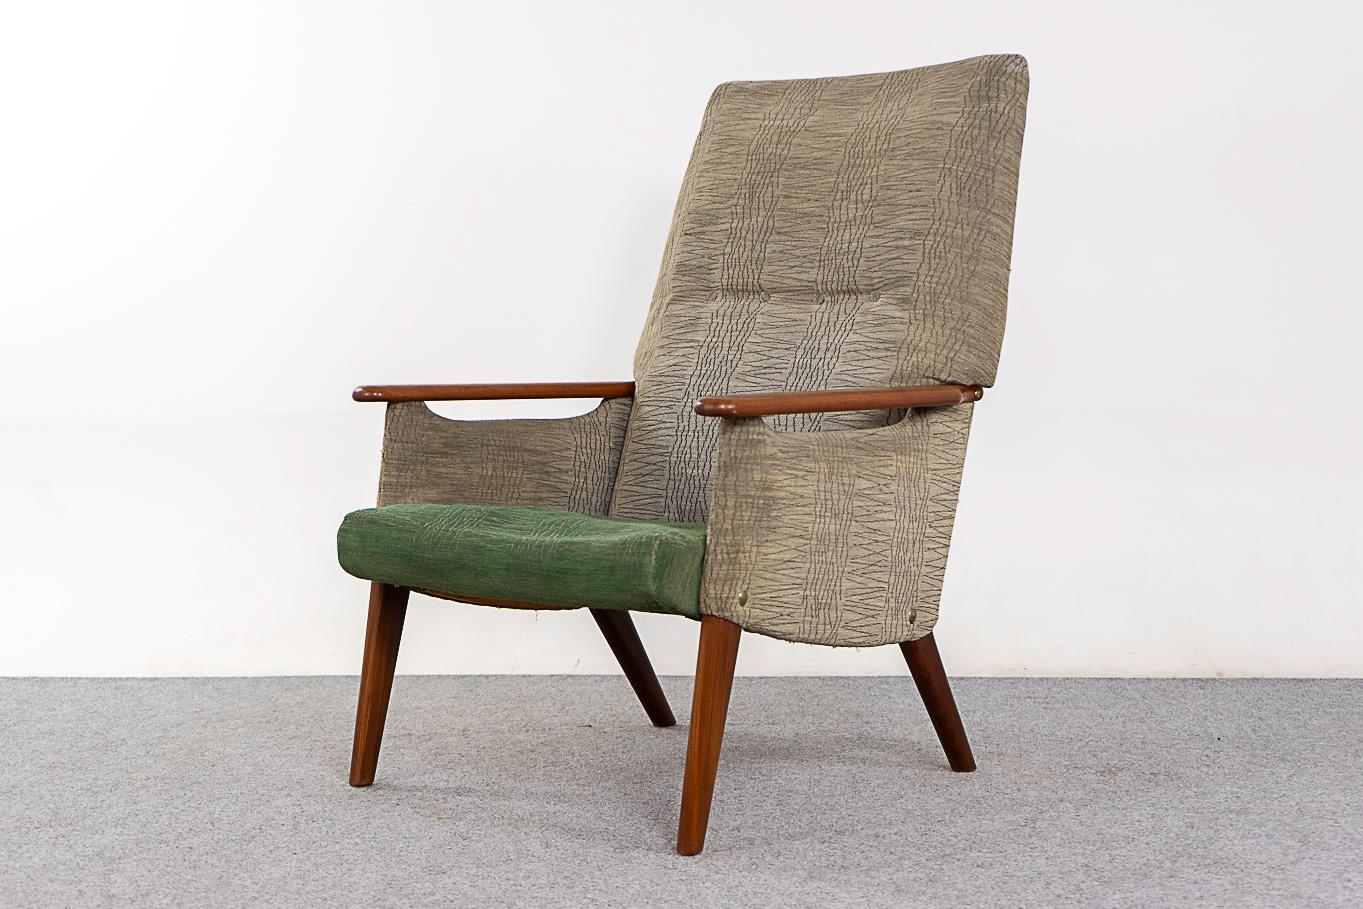 Teak Danish lounge chair 1960's. Elegant lines with floating solid wood armrests and sleek legs. Original upholstery with significant wear, foam requires immediate replacement.

Unrestored item with option to purchase in restored condition for an